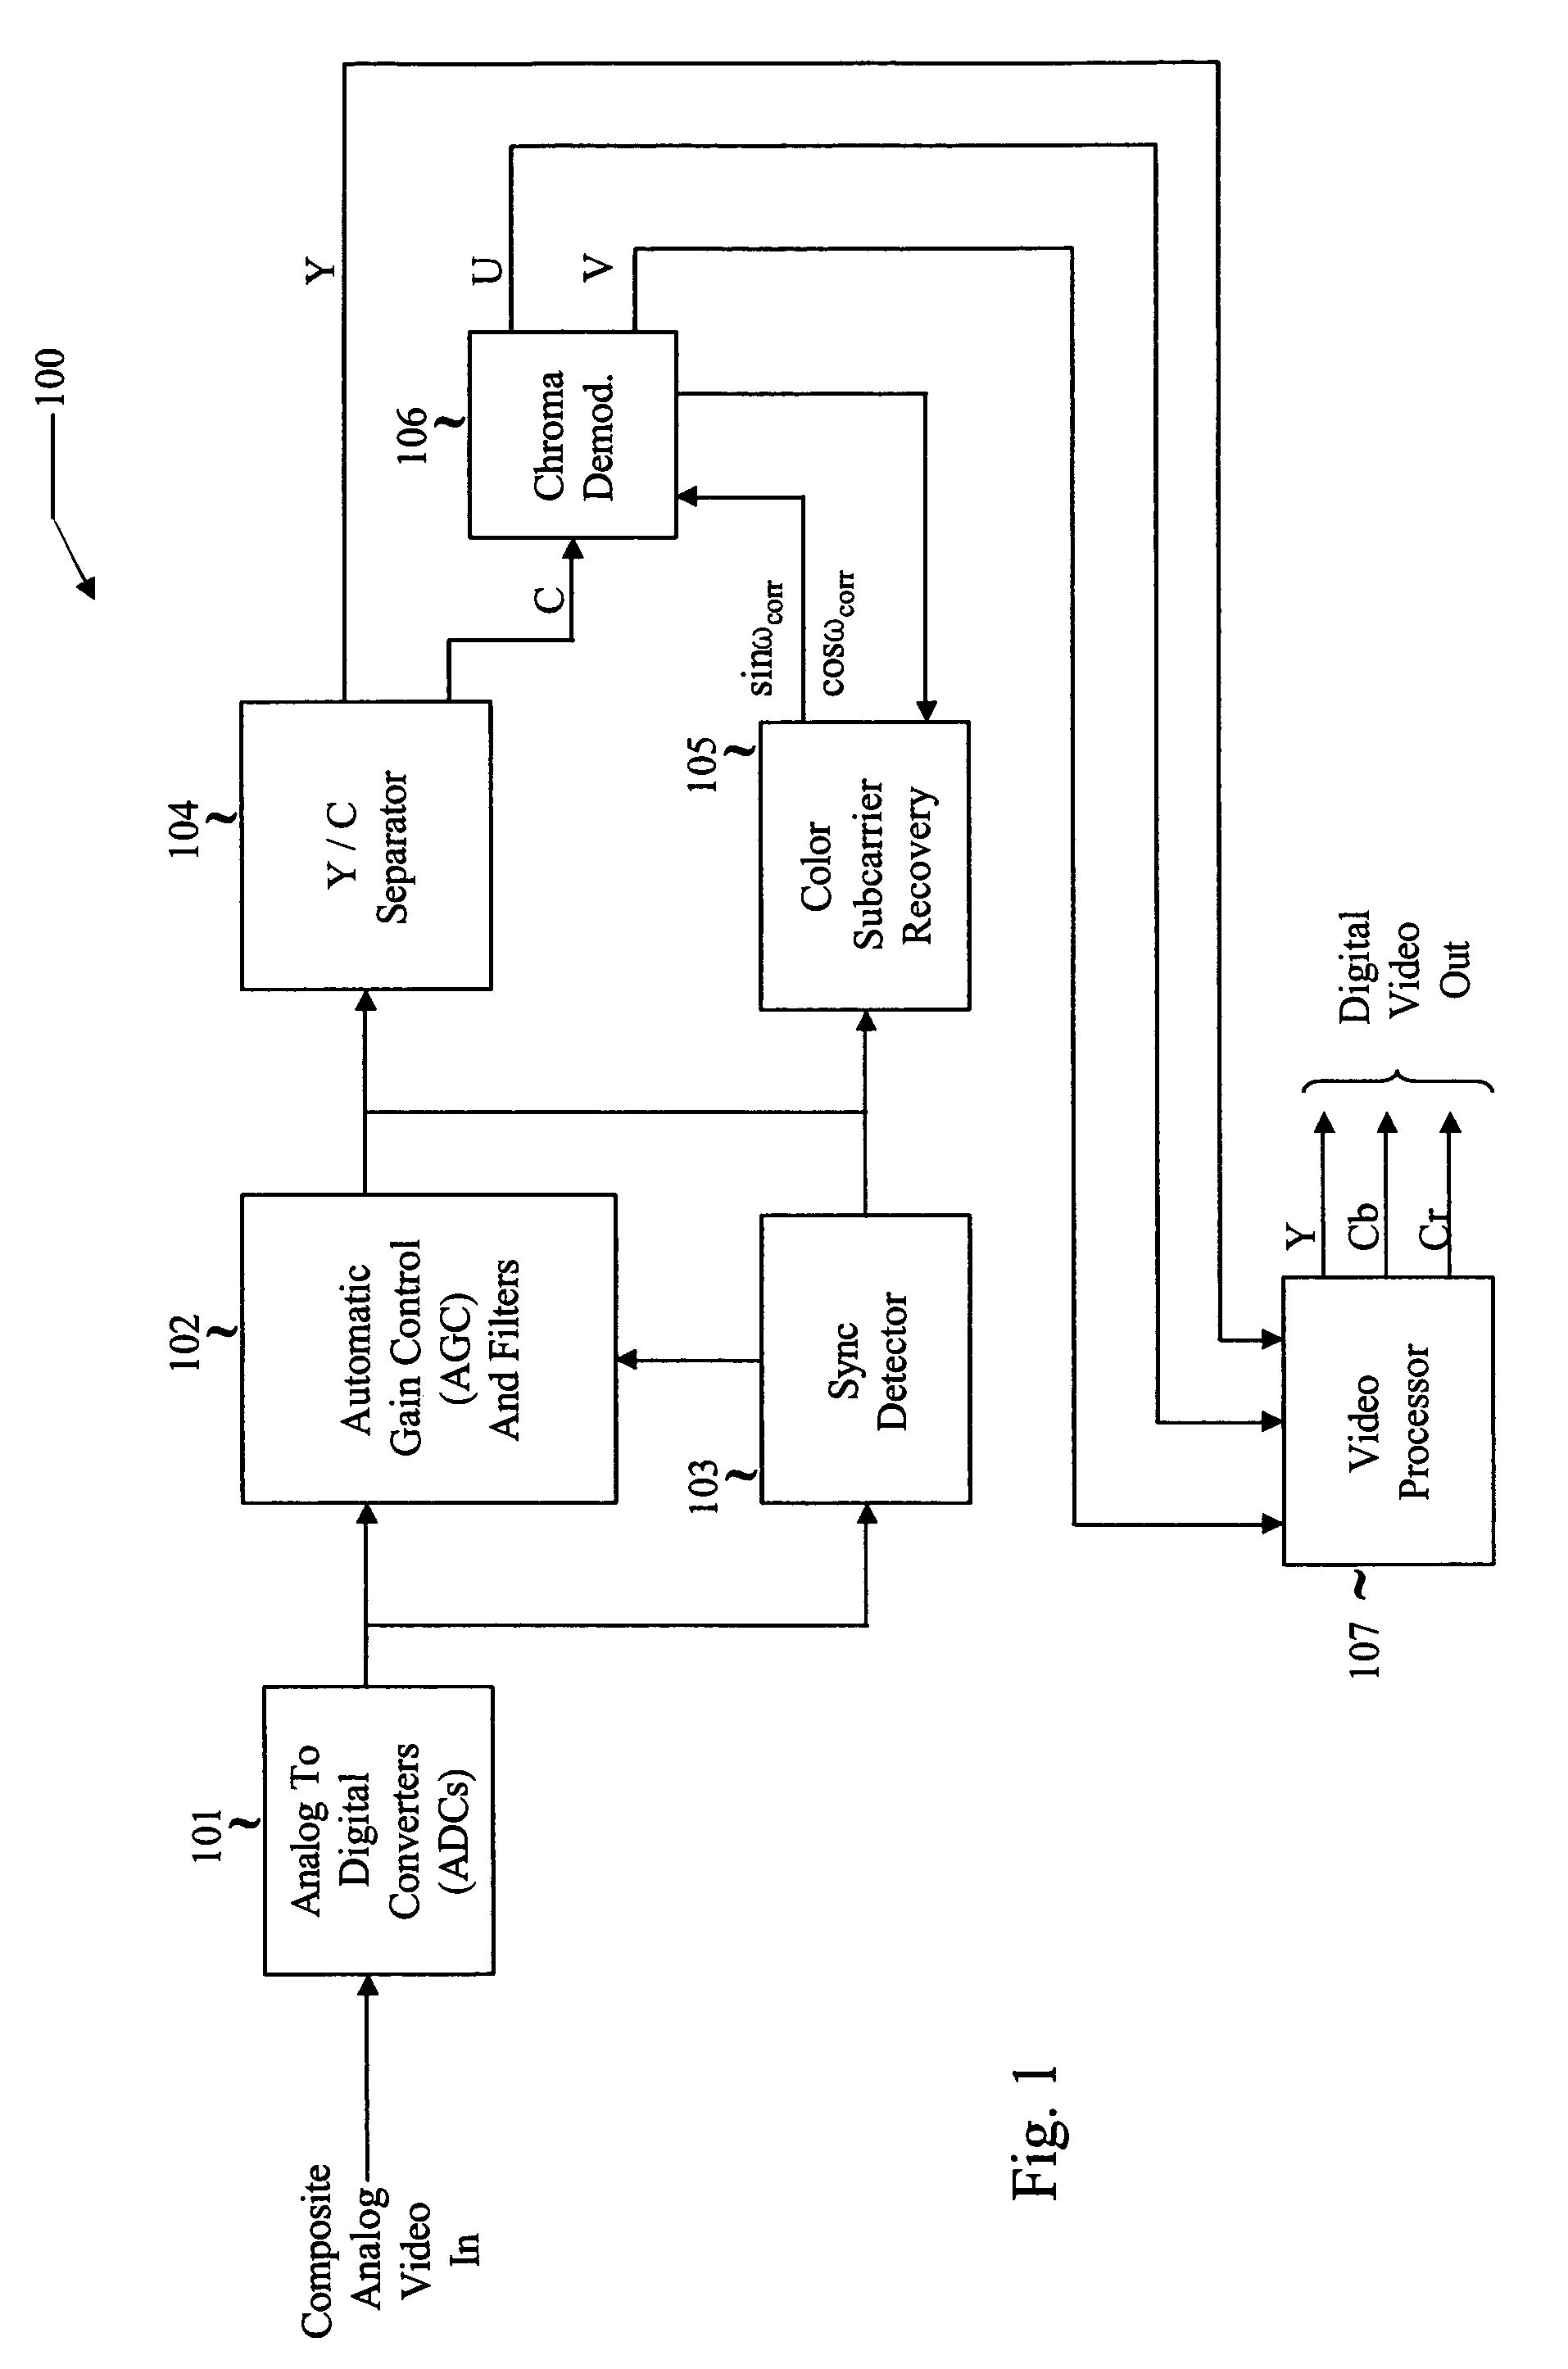 Systems and methods for reducing noise during video deinterlacing